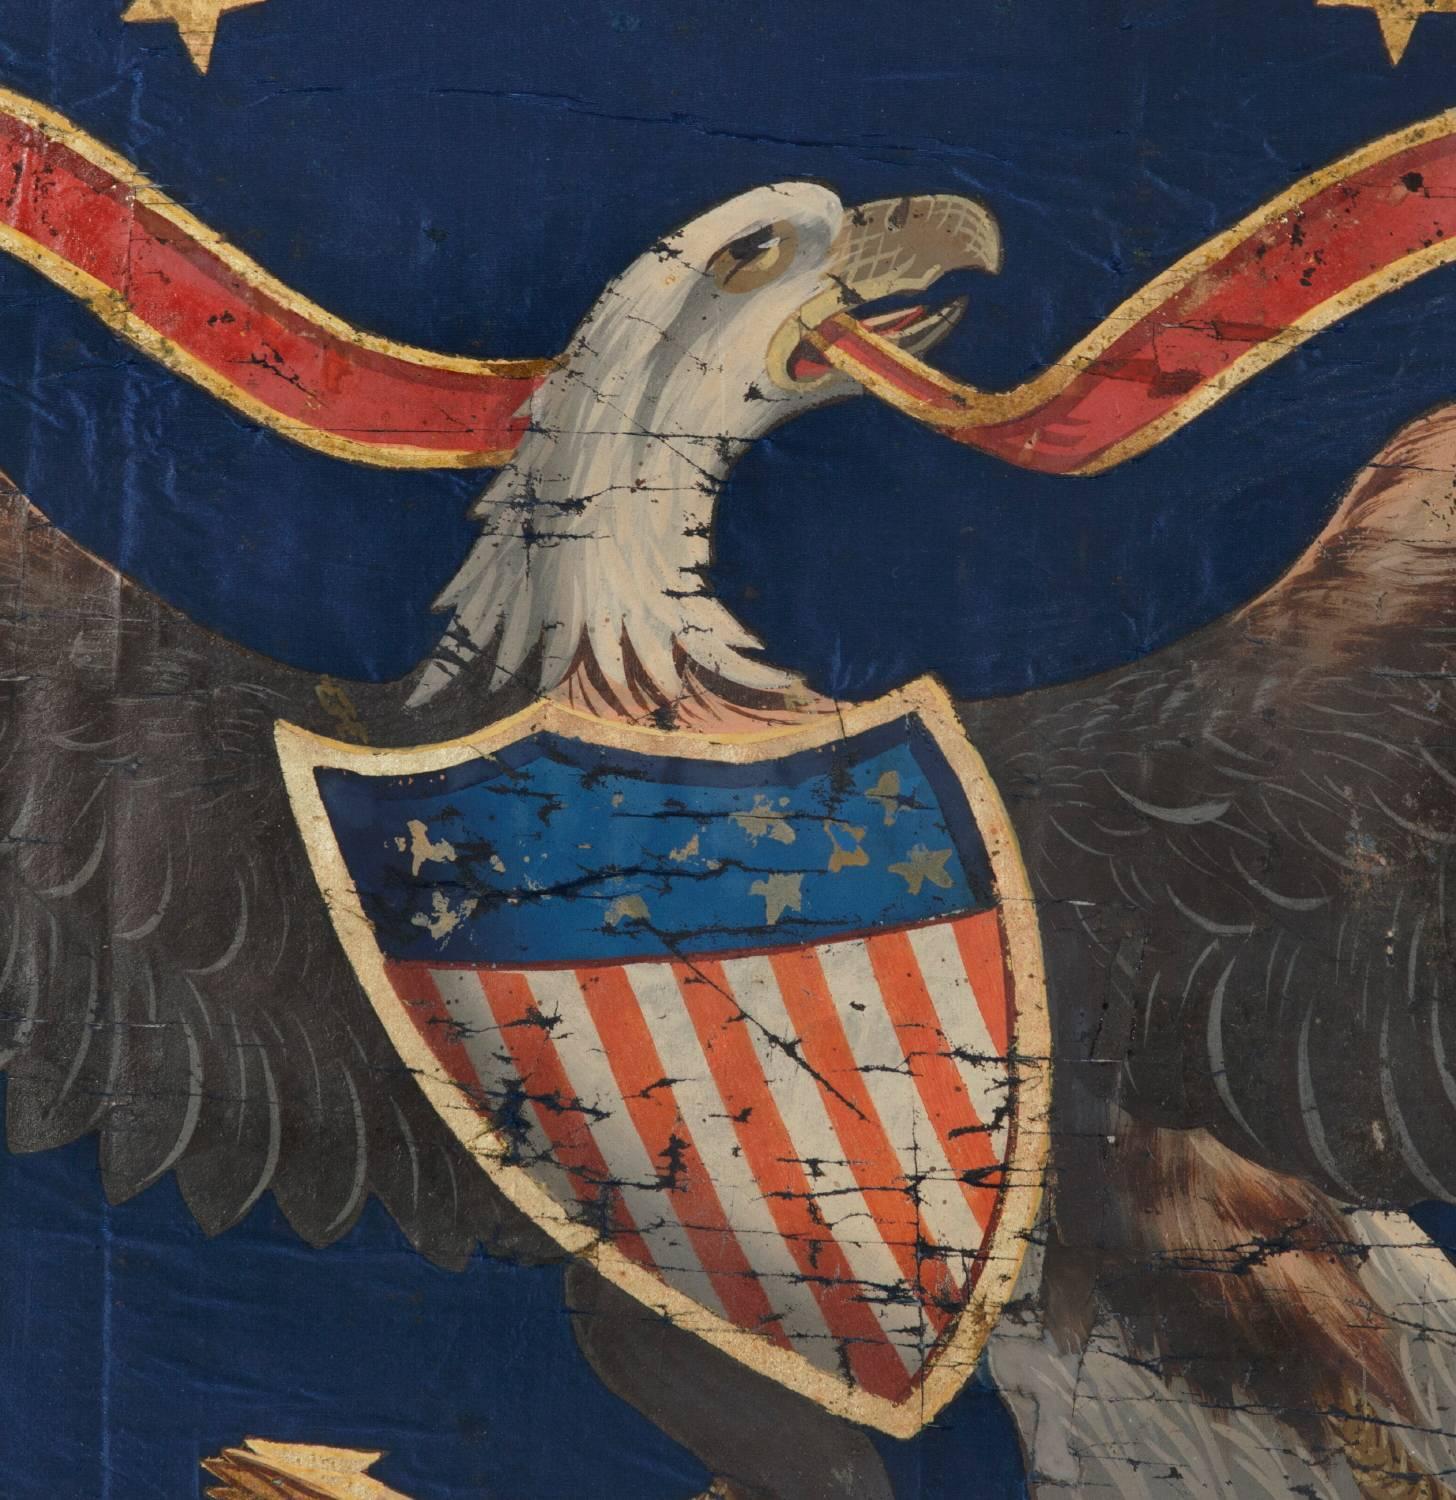 RARE CIVIL WAR PERIOD FEDERAL STANDARD STYLE FLANK GUIDON OF THE 100TH NEW YORK VOLUNTEER INFANTRY, HAND-PAINTED AND GILDED ON SILK, 1862-1865:

 During the Civil War, U.S. Army regulations set forth that an infantry unit would carry two flags.